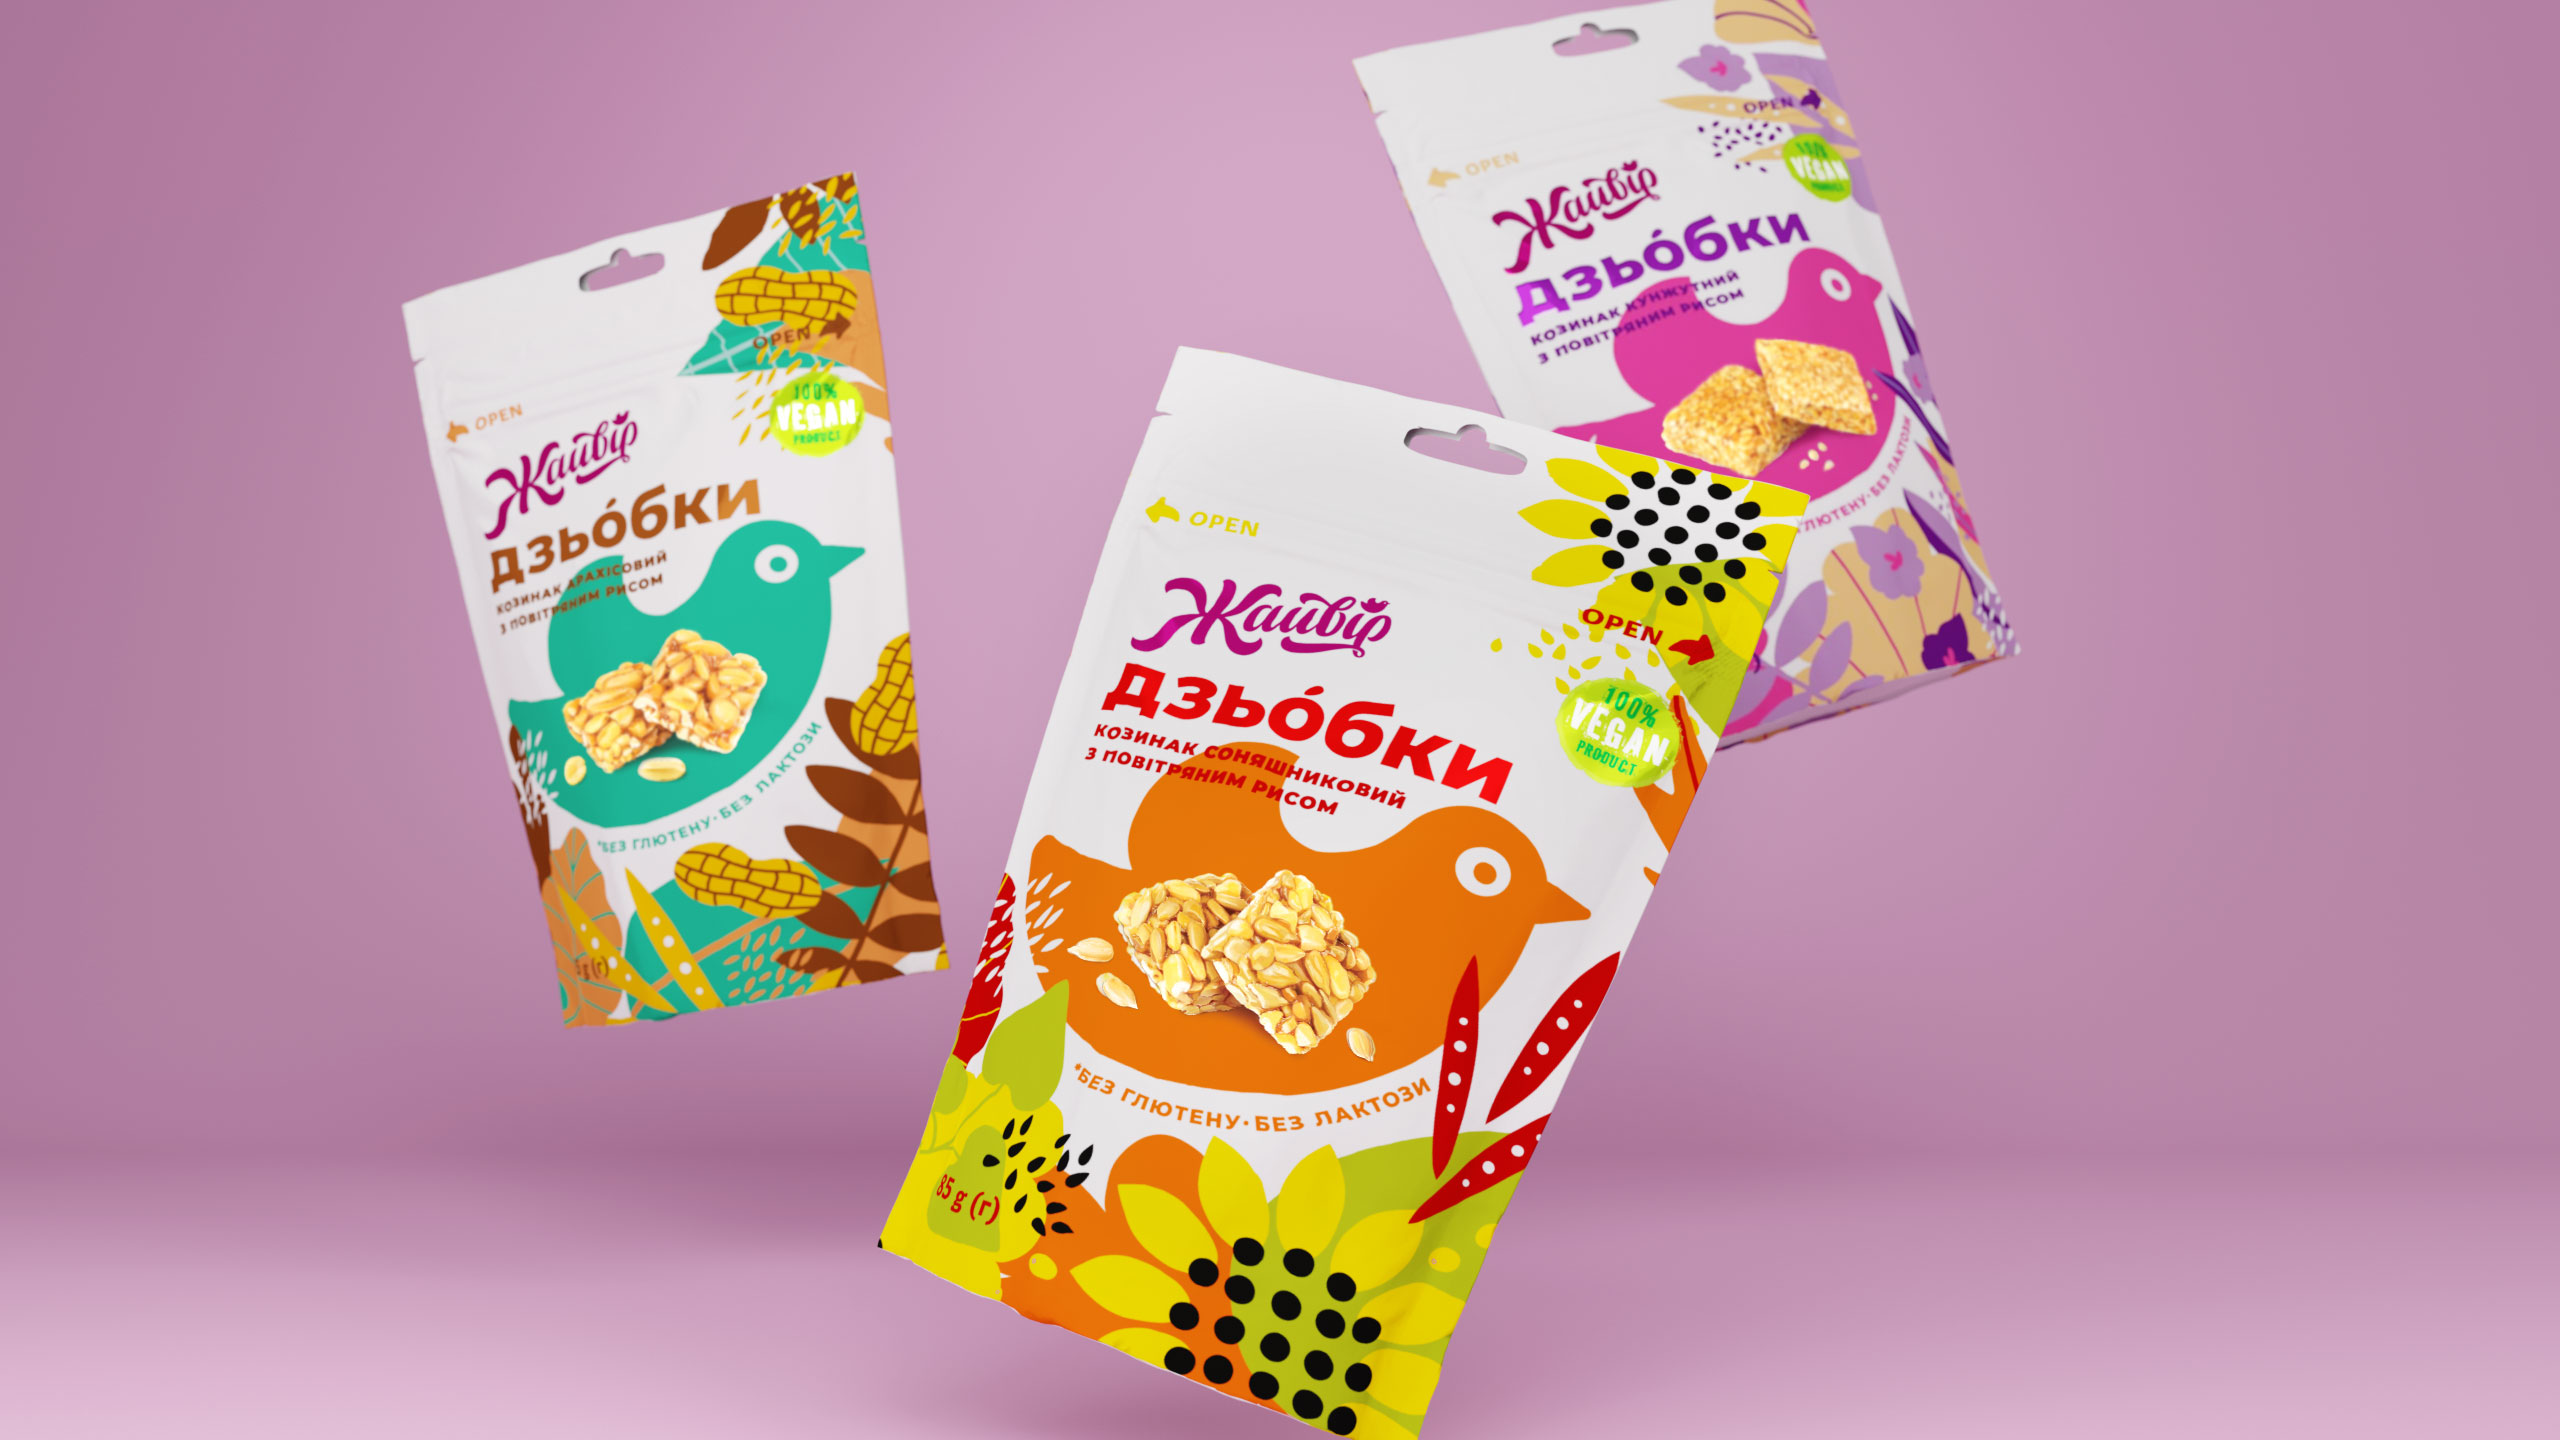 DOZEN came up with a name and created a packaging design for brittles “Dziobky”